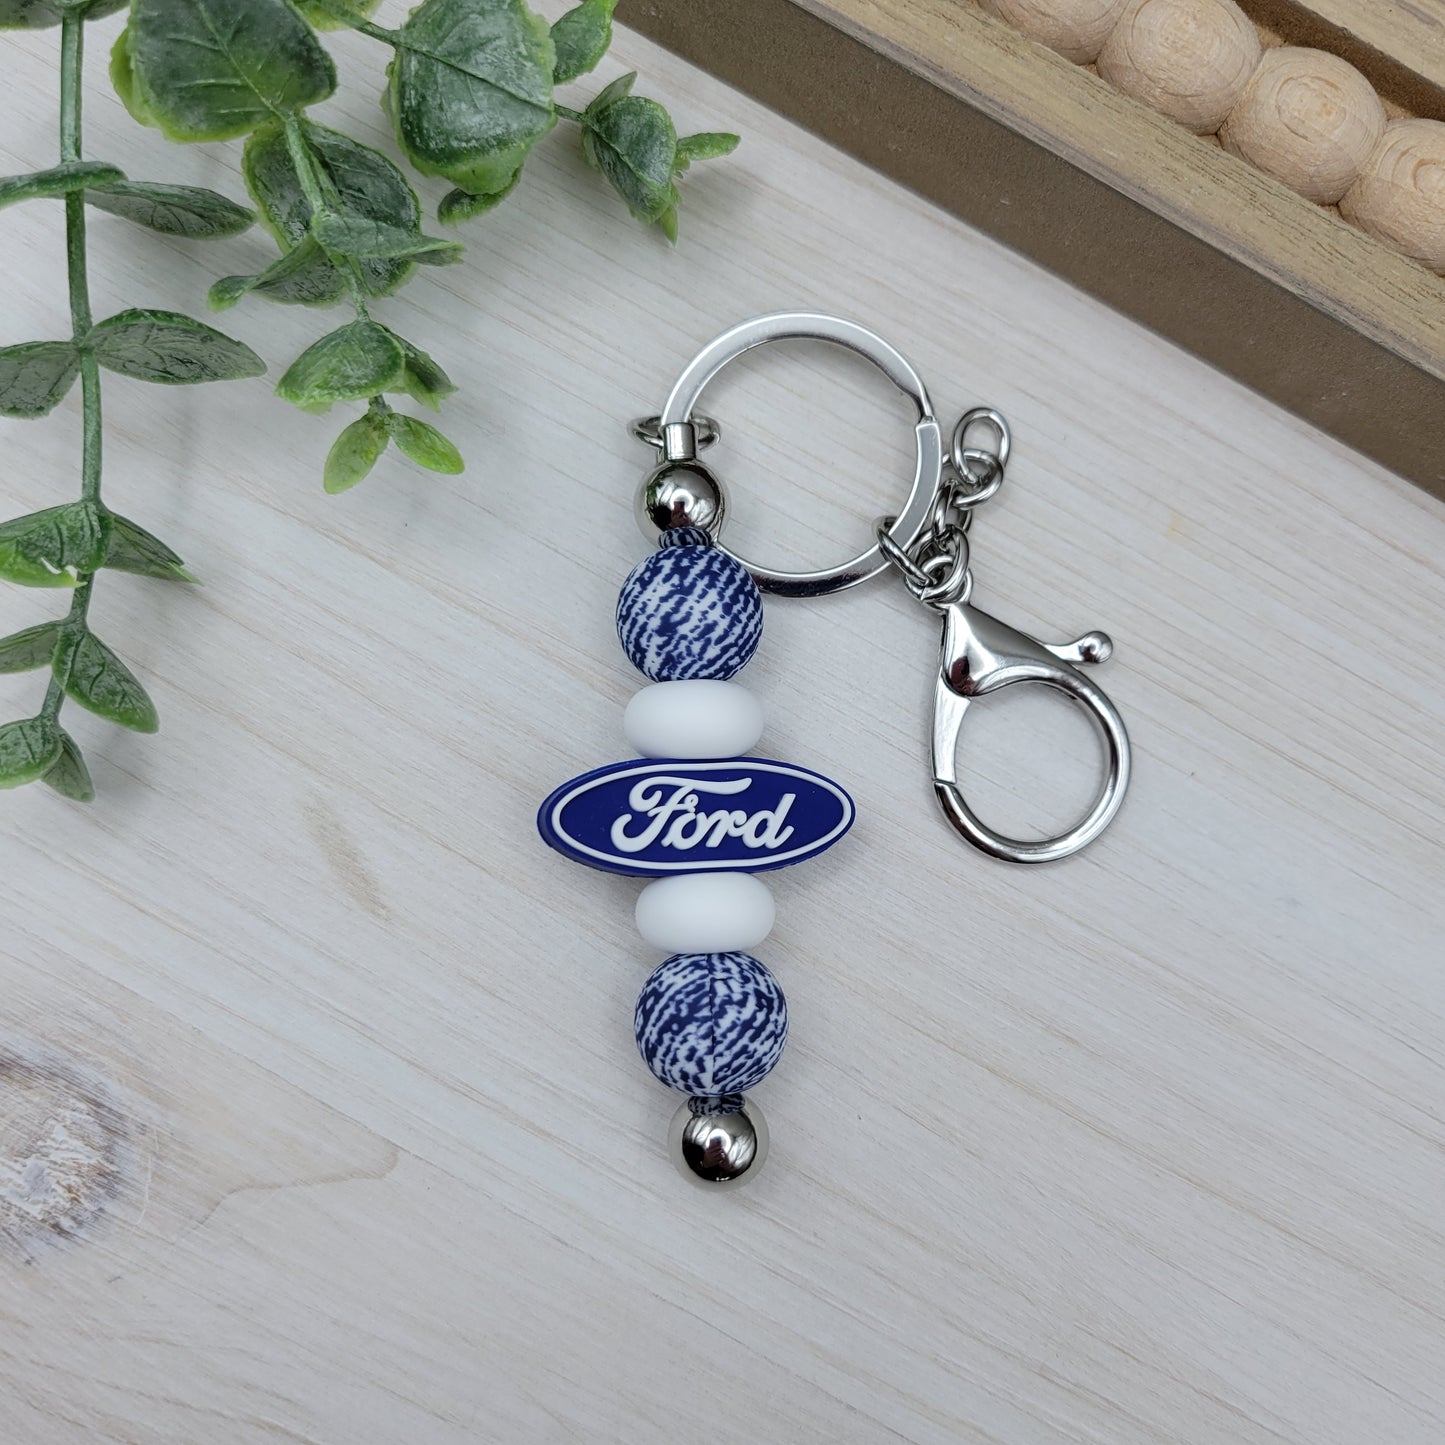 Ford Barbell Keychain